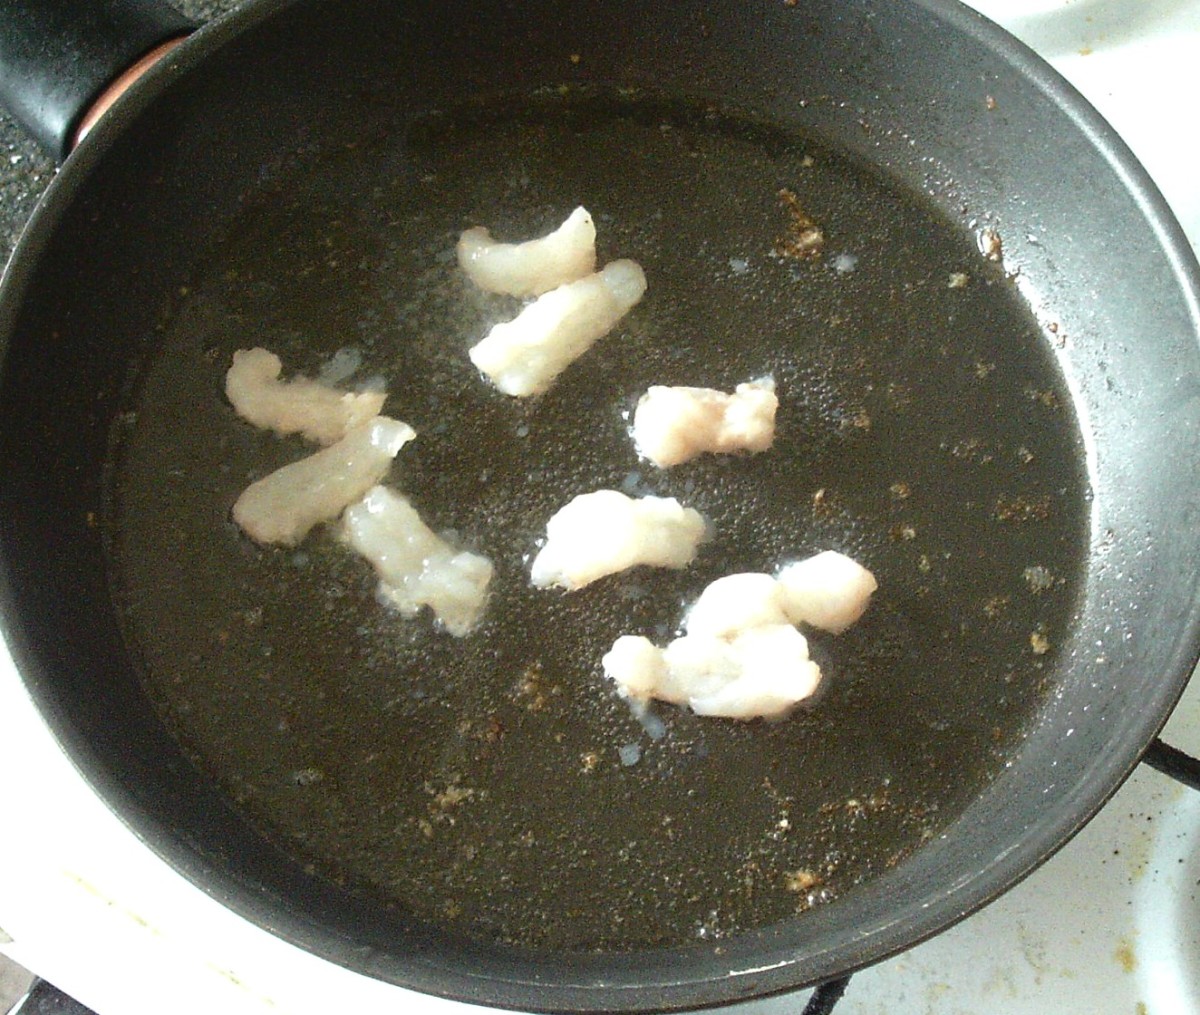 Scampi tails are quickly fried in bacon fat